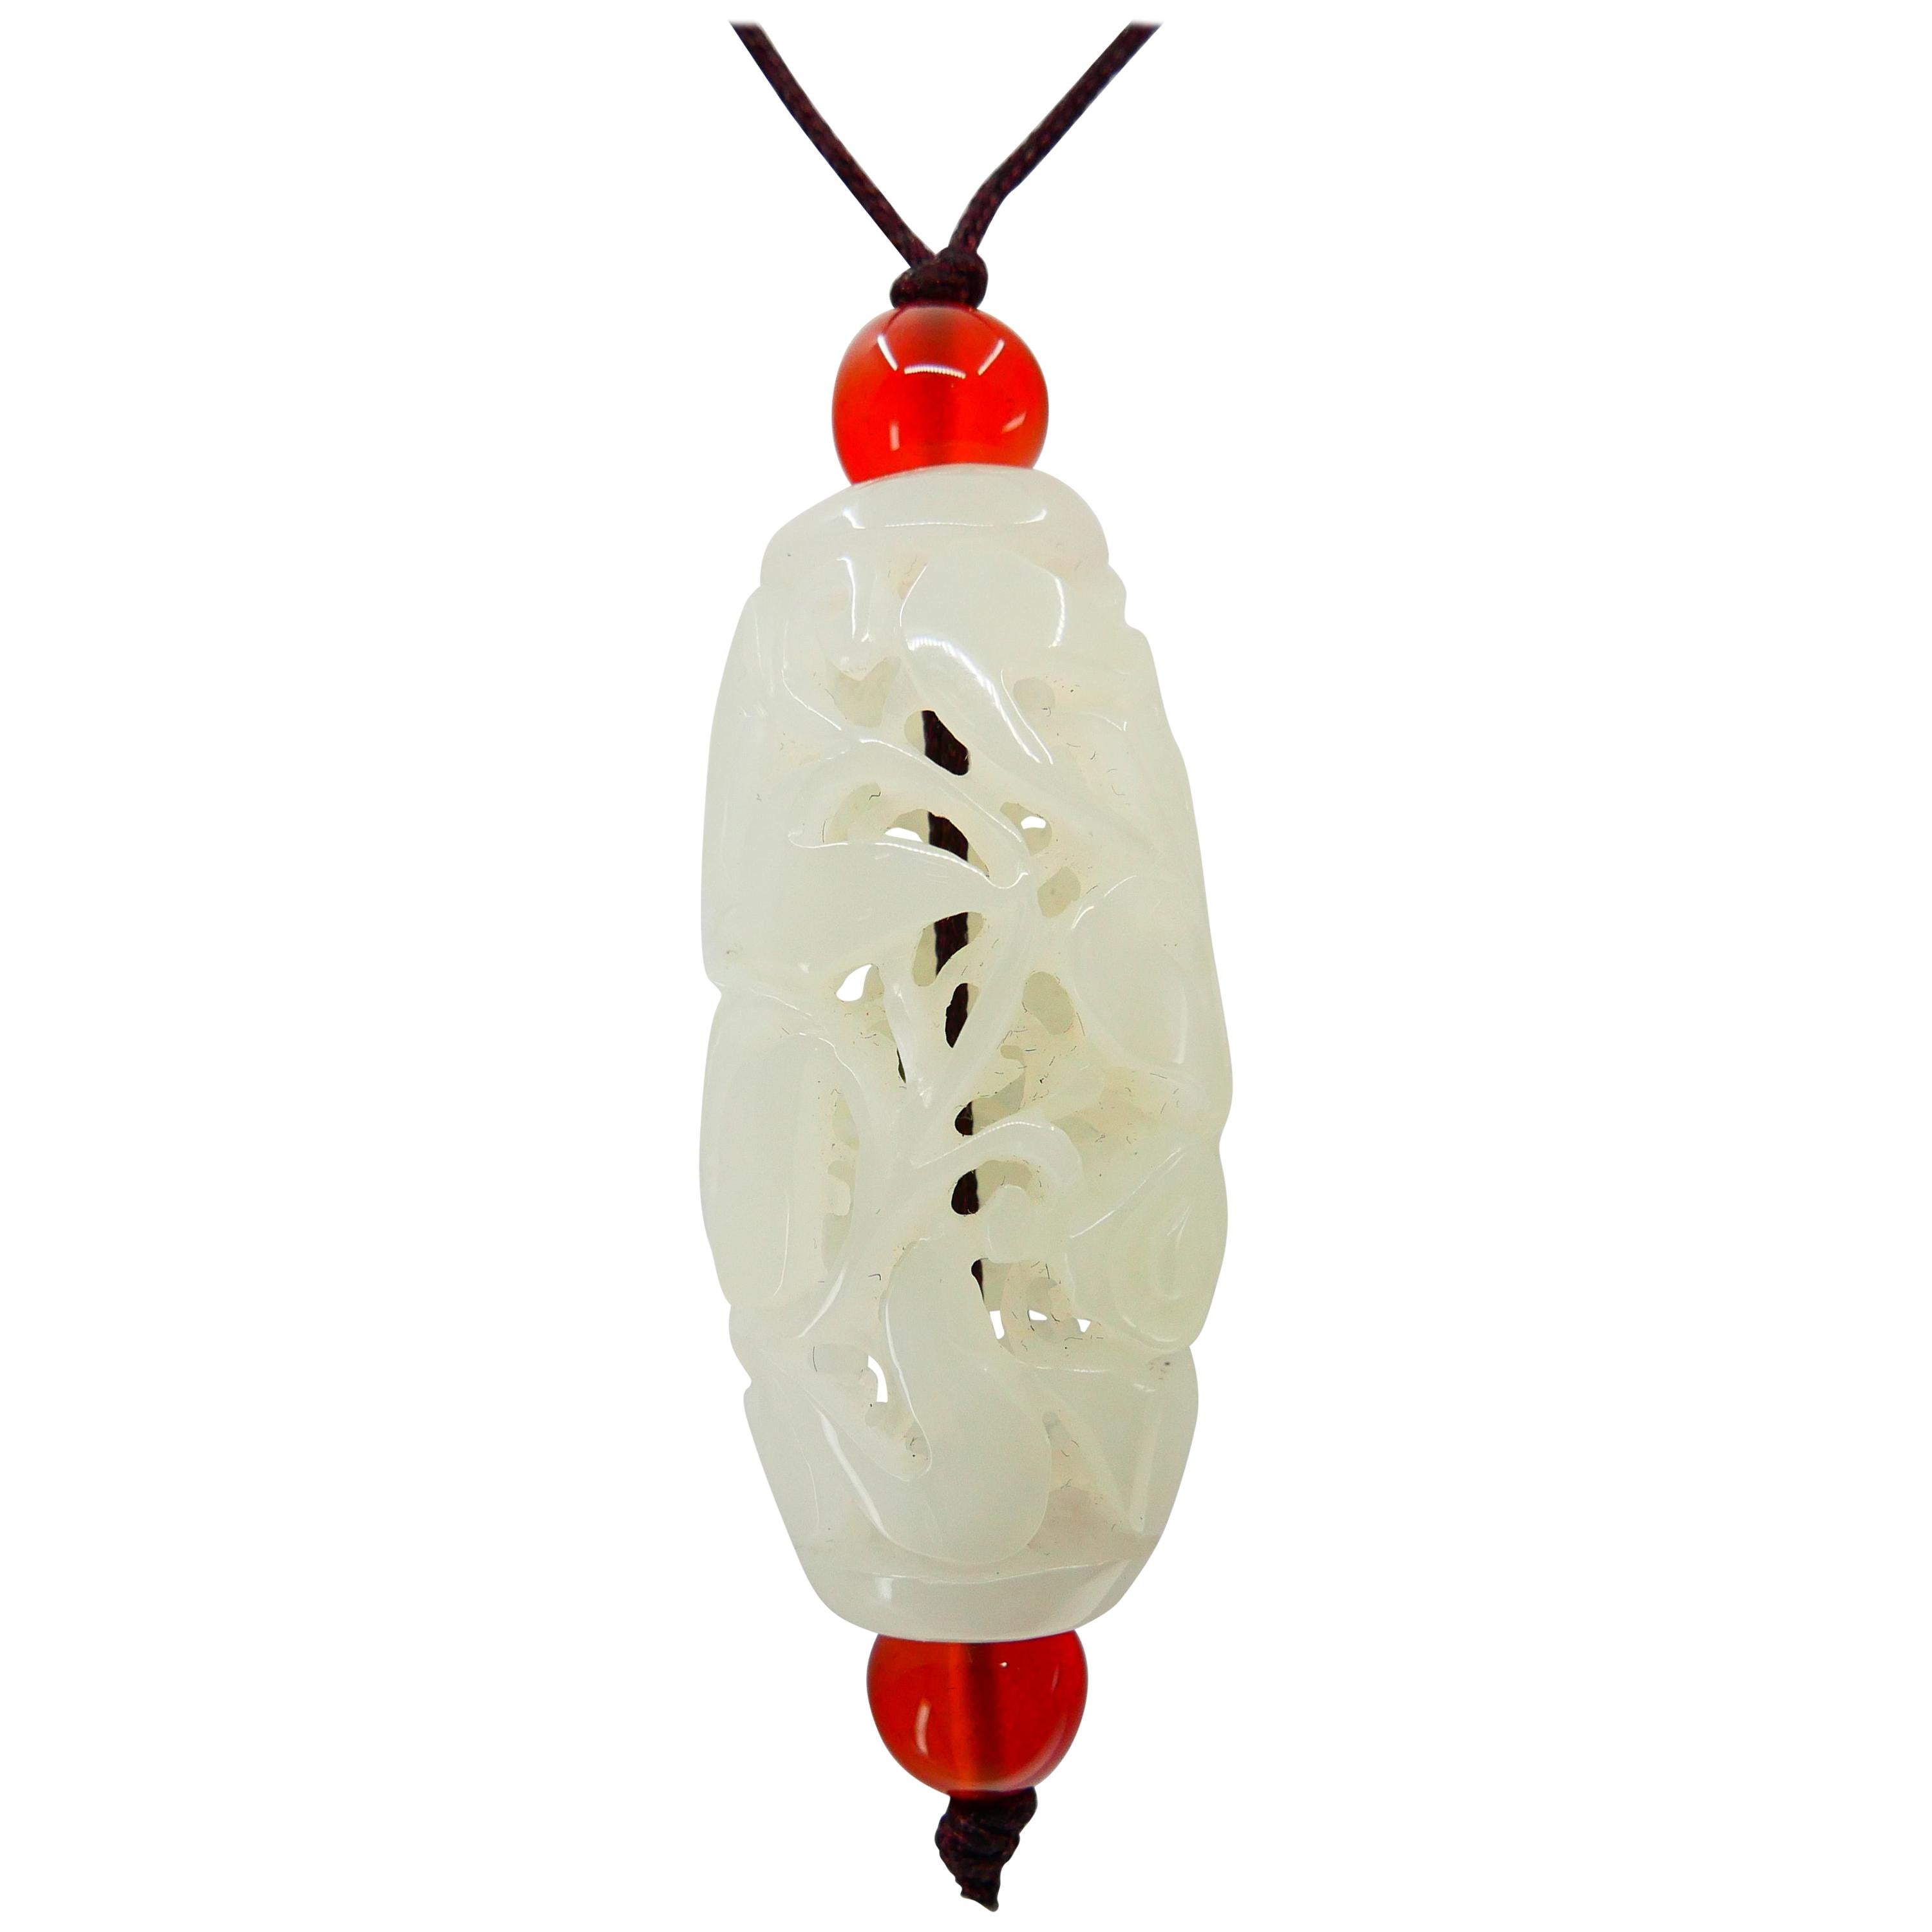 Certified Natural Nephrite White Jade Pendant, Detailed Carving Well Hollowed